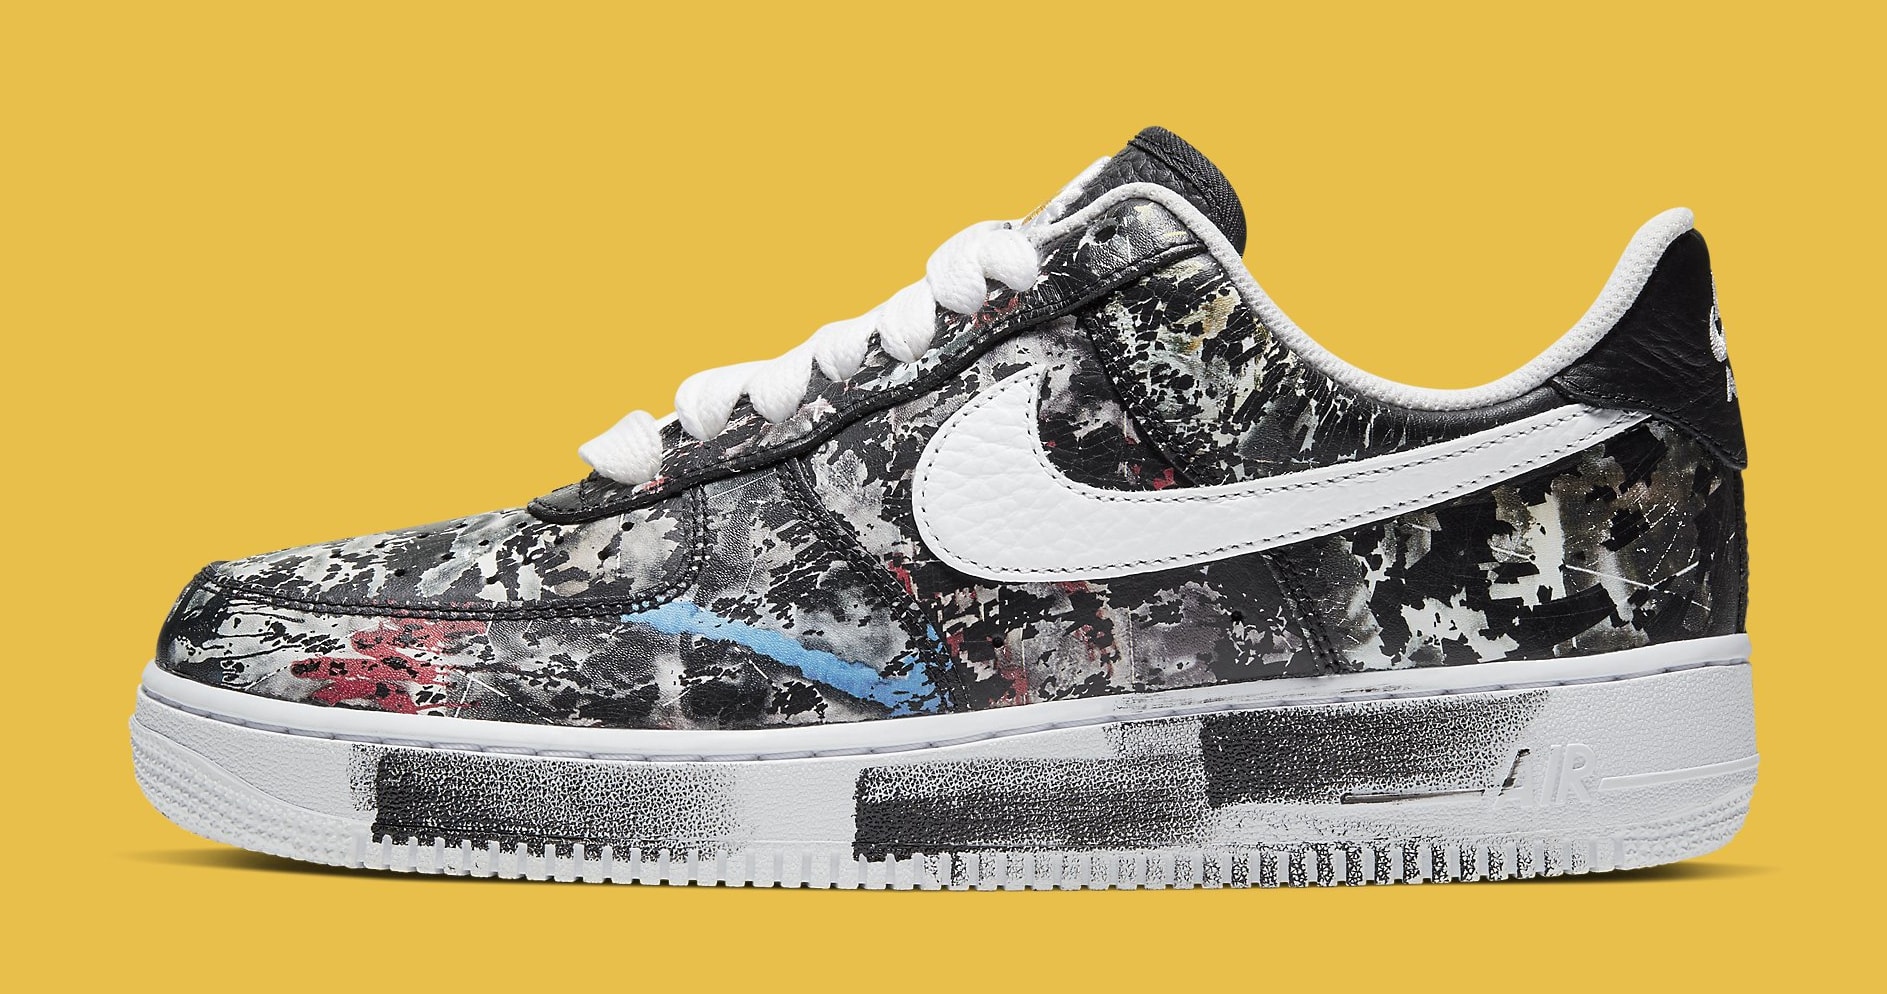 G-Dragon x Nike Air Force 1 Low 'Para-noise' Release Date AQ3692 